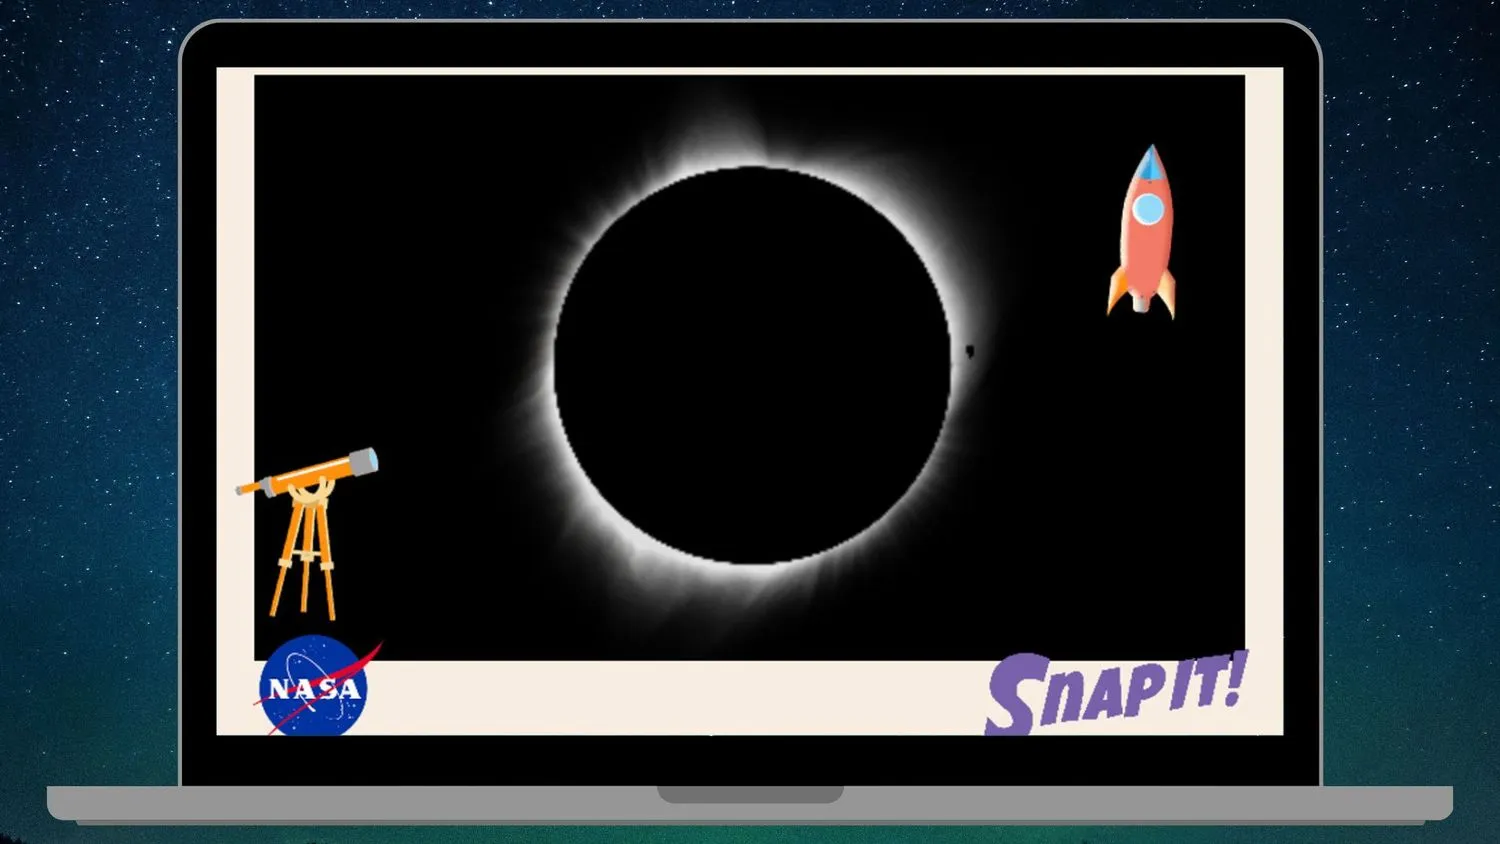 nasa snap it game on a laptop screen graphic against a background of space.